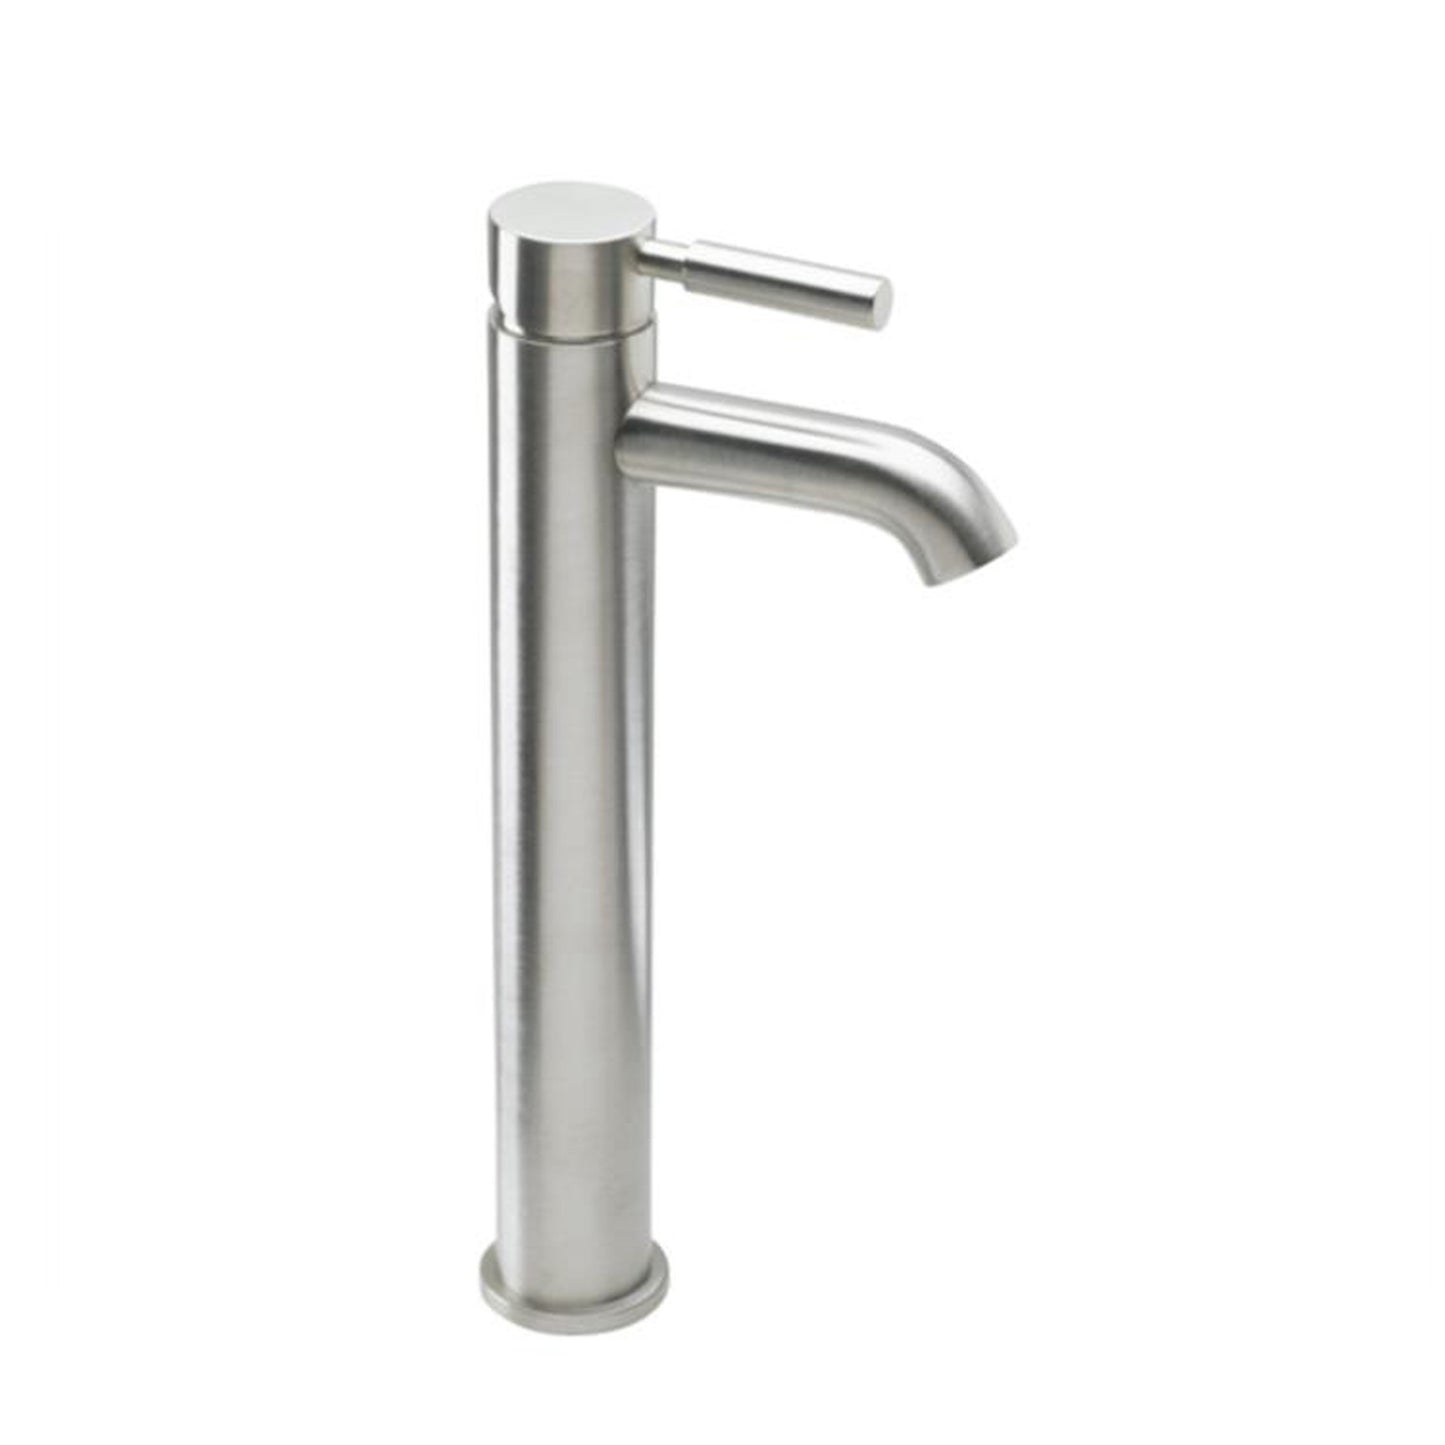 Eviva Ramo Vessel Mount Single Hole One Handle Bathroom Faucet in Brushed Nickel Finish - Luxe Bathroom Vanities Luxury Bathroom Fixtures Bathroom Furniture